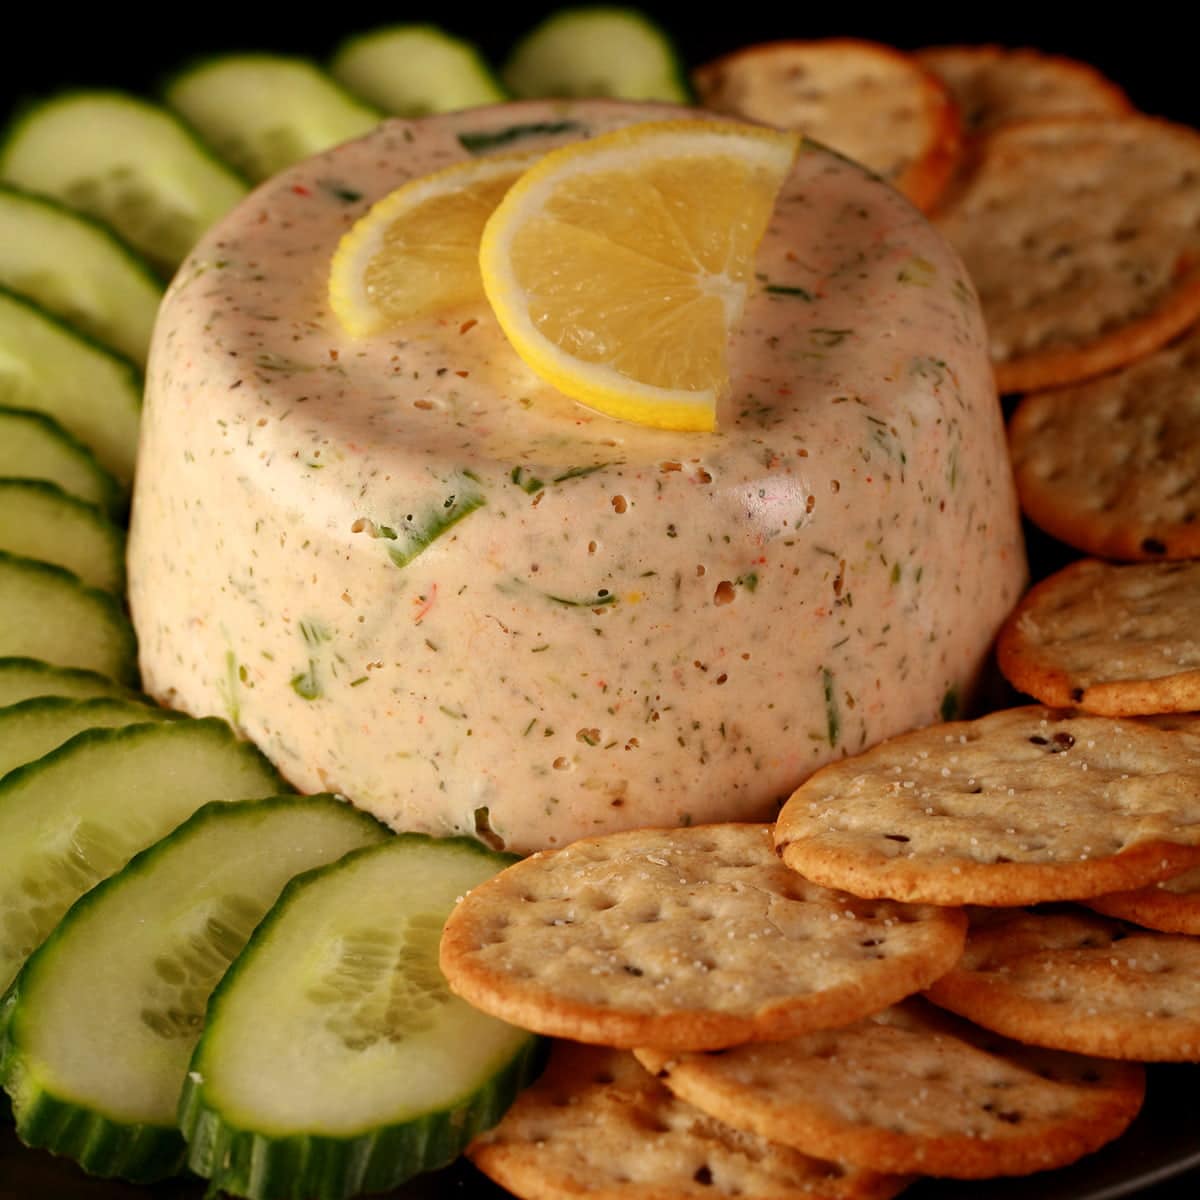 A closeup view of crab mousse. It is topped with slices of lemon and a sprig of parsley, and is surrounded by cucumber slices and crackers.